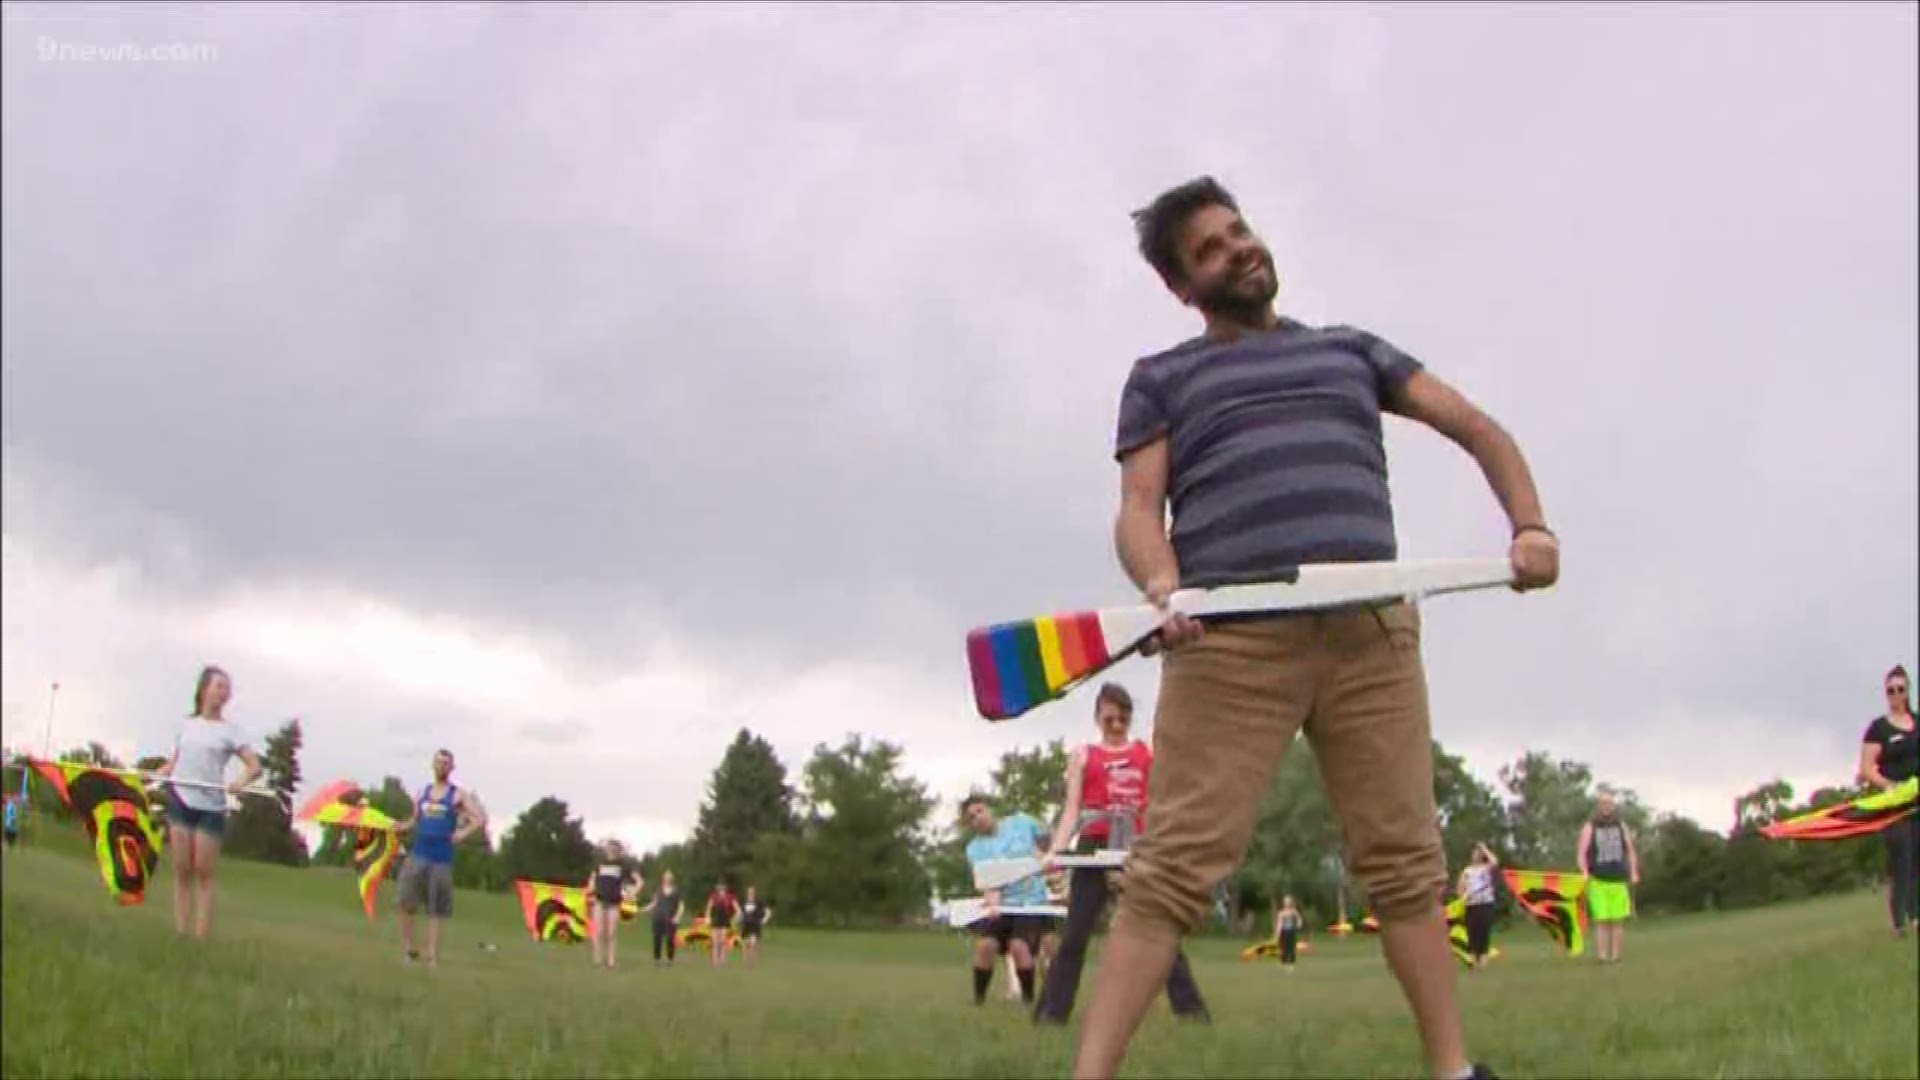 The Colorado Colorguard Allstars, also known as the Flaggots Denver, will be marching in Denver's PrideFest parade.